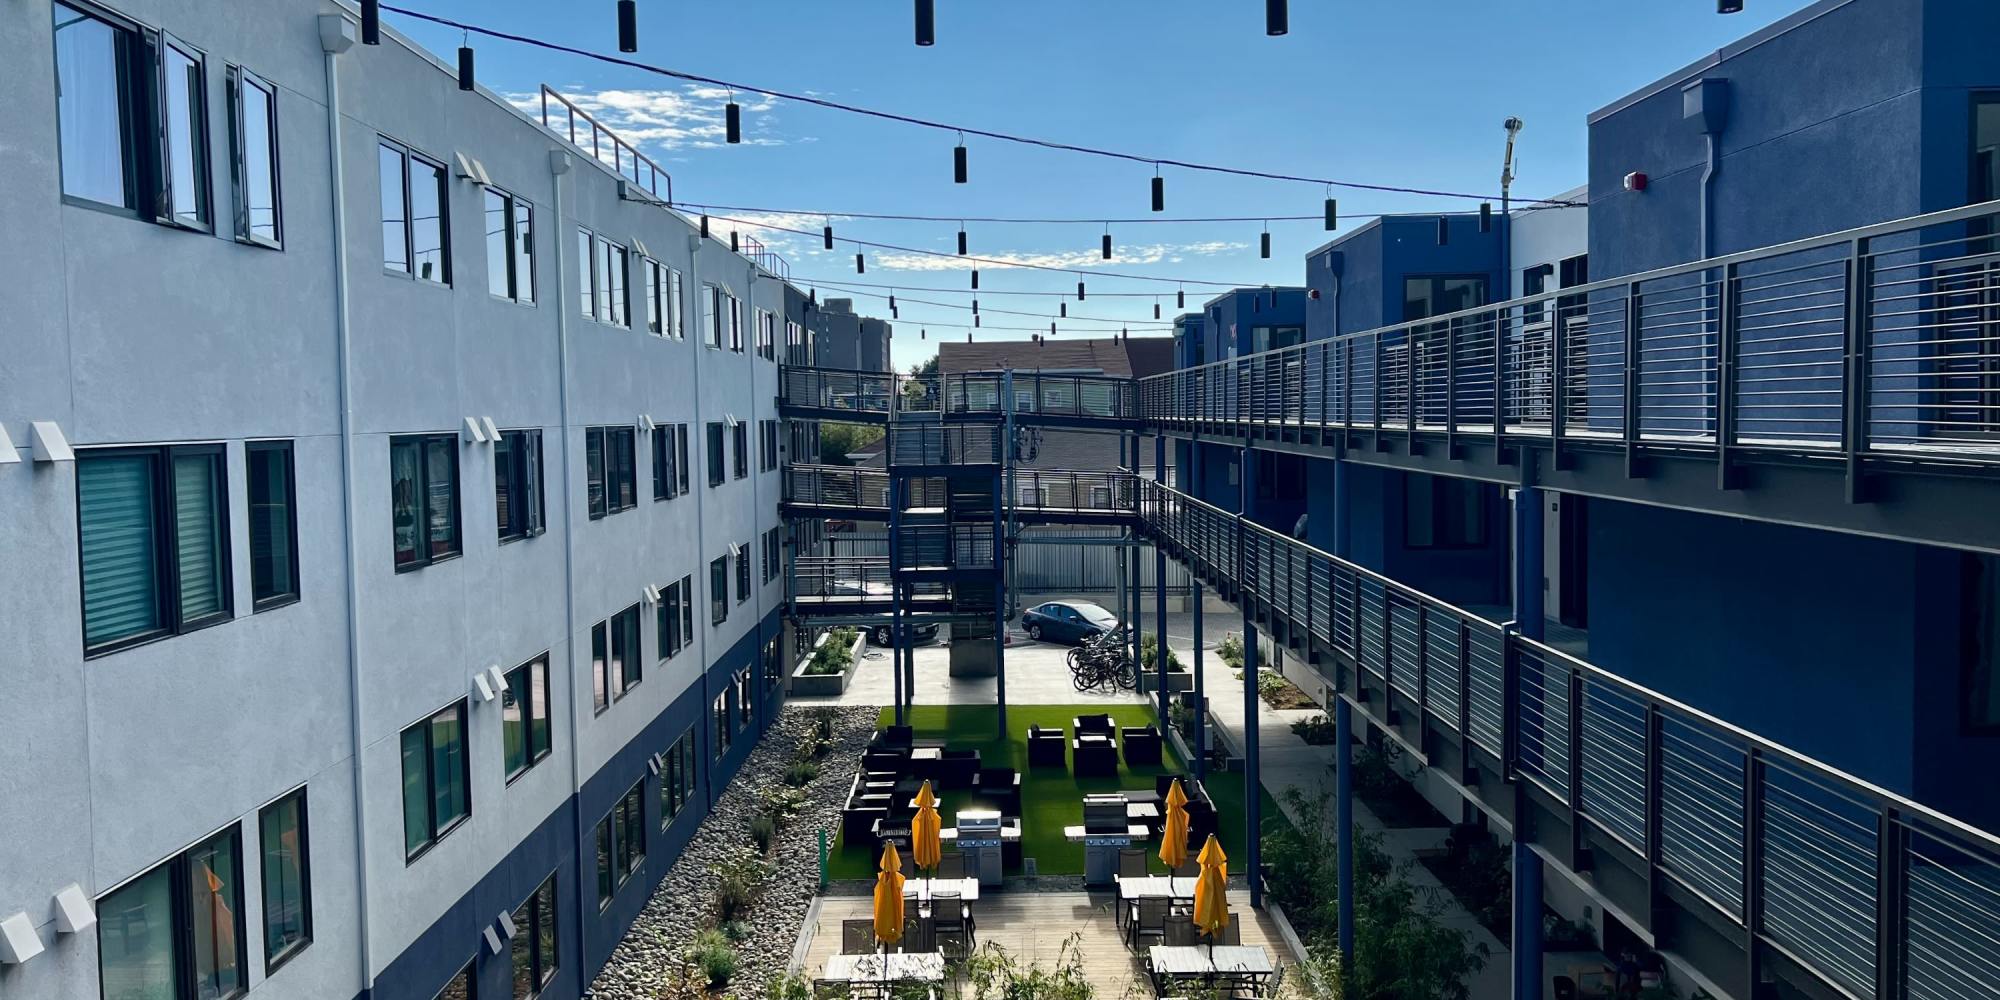 Aerial view of the courtyard at 1919 Market Street in Oakland, California